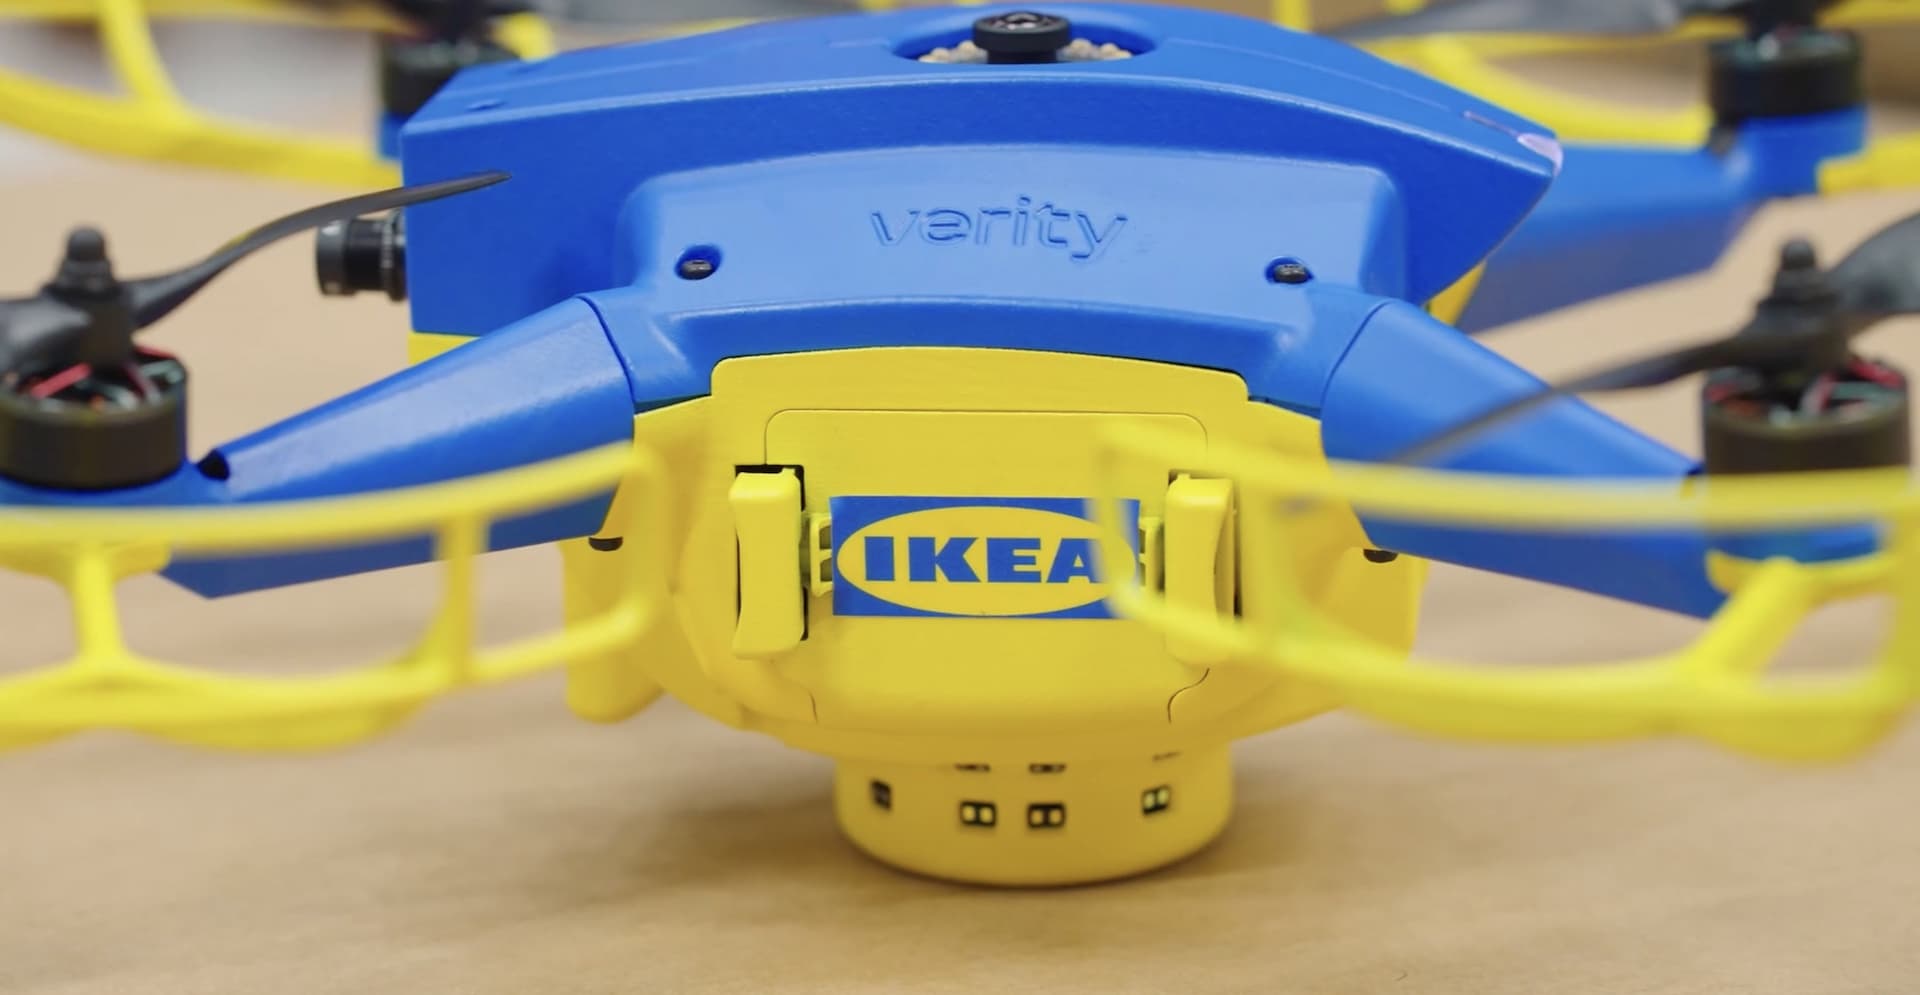 More Ikea stores to utilize stock-counting drones